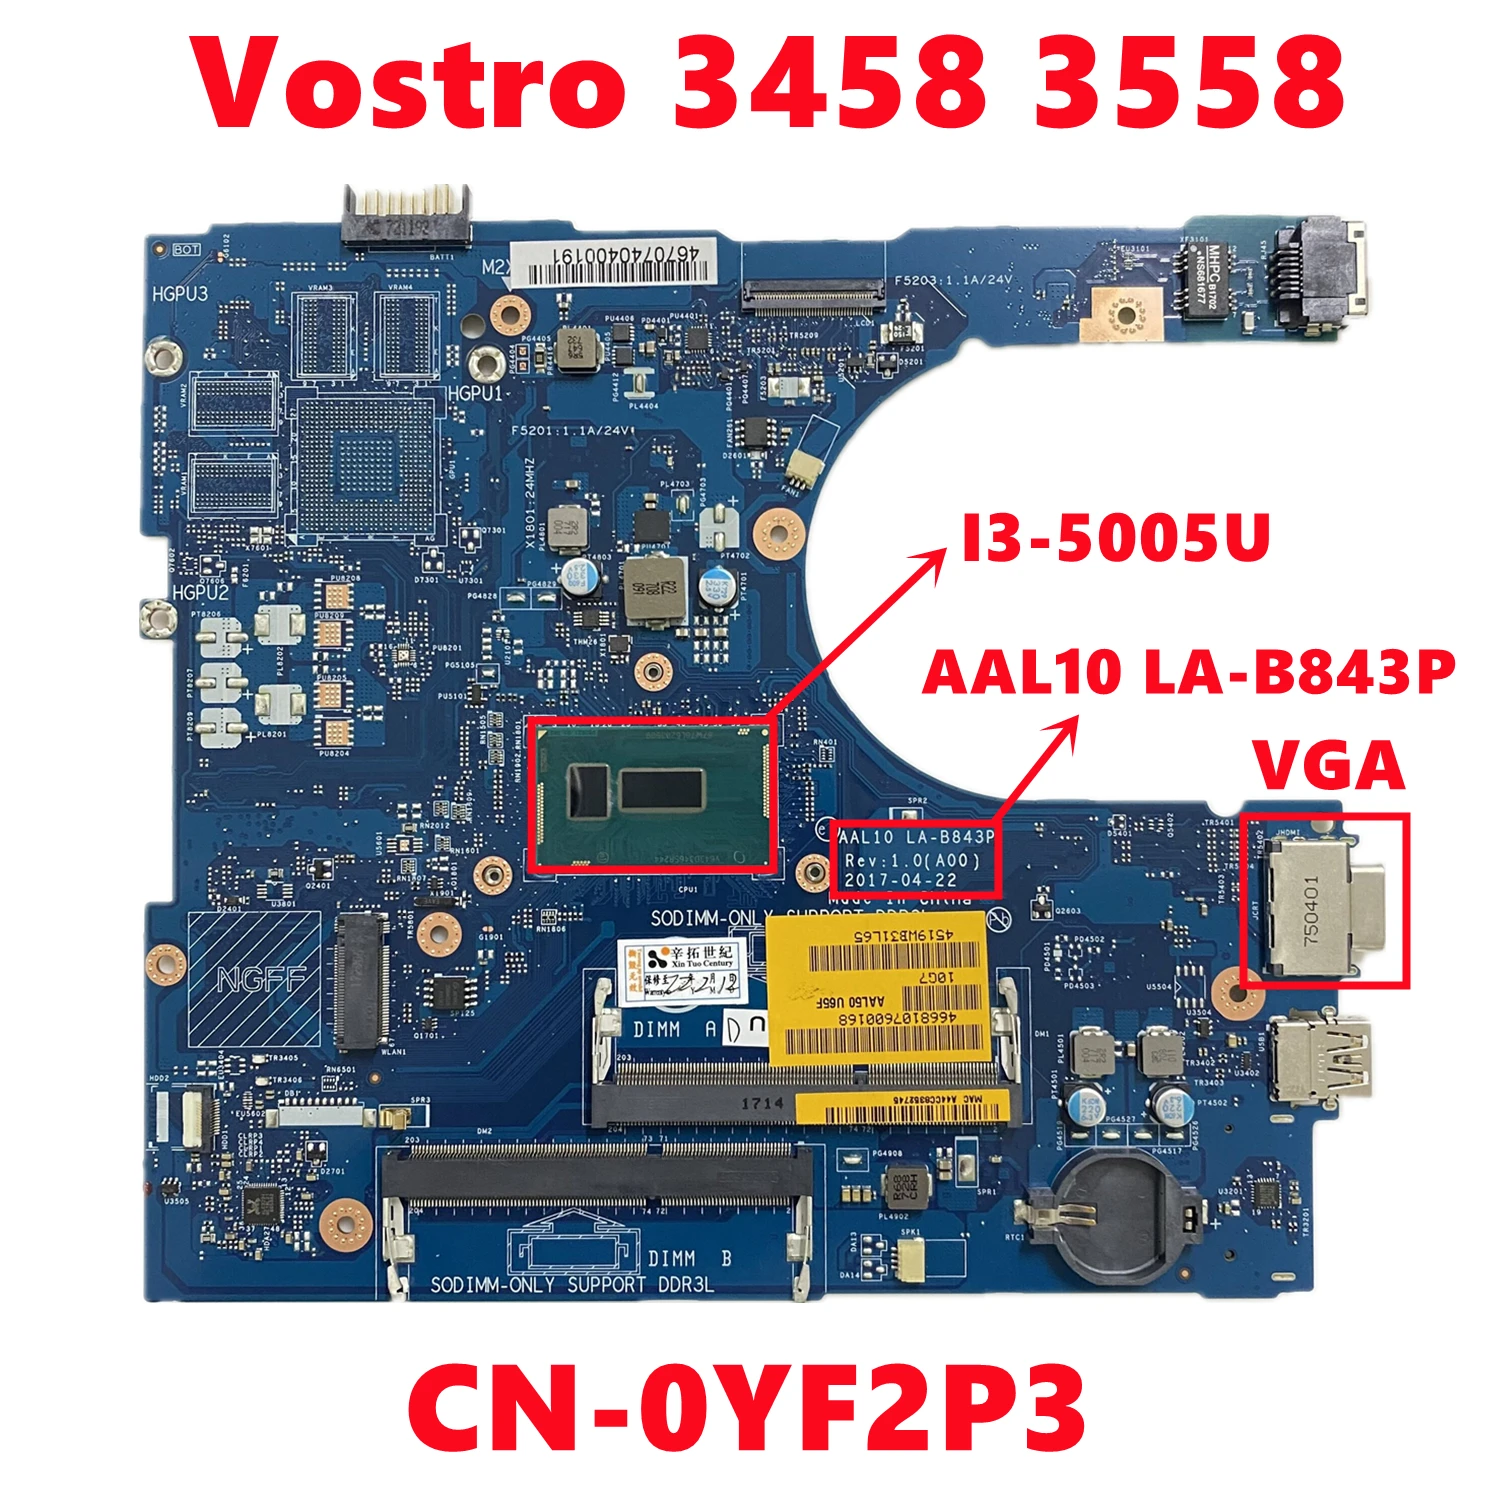 

CN-0YF2P3 0YF2P3 YF2P3 For dell Vostro 3458 3558 Laptop Motherboard AAL10 LA-B843P With I3-5005U CPU DDR3L 100% Tested OK